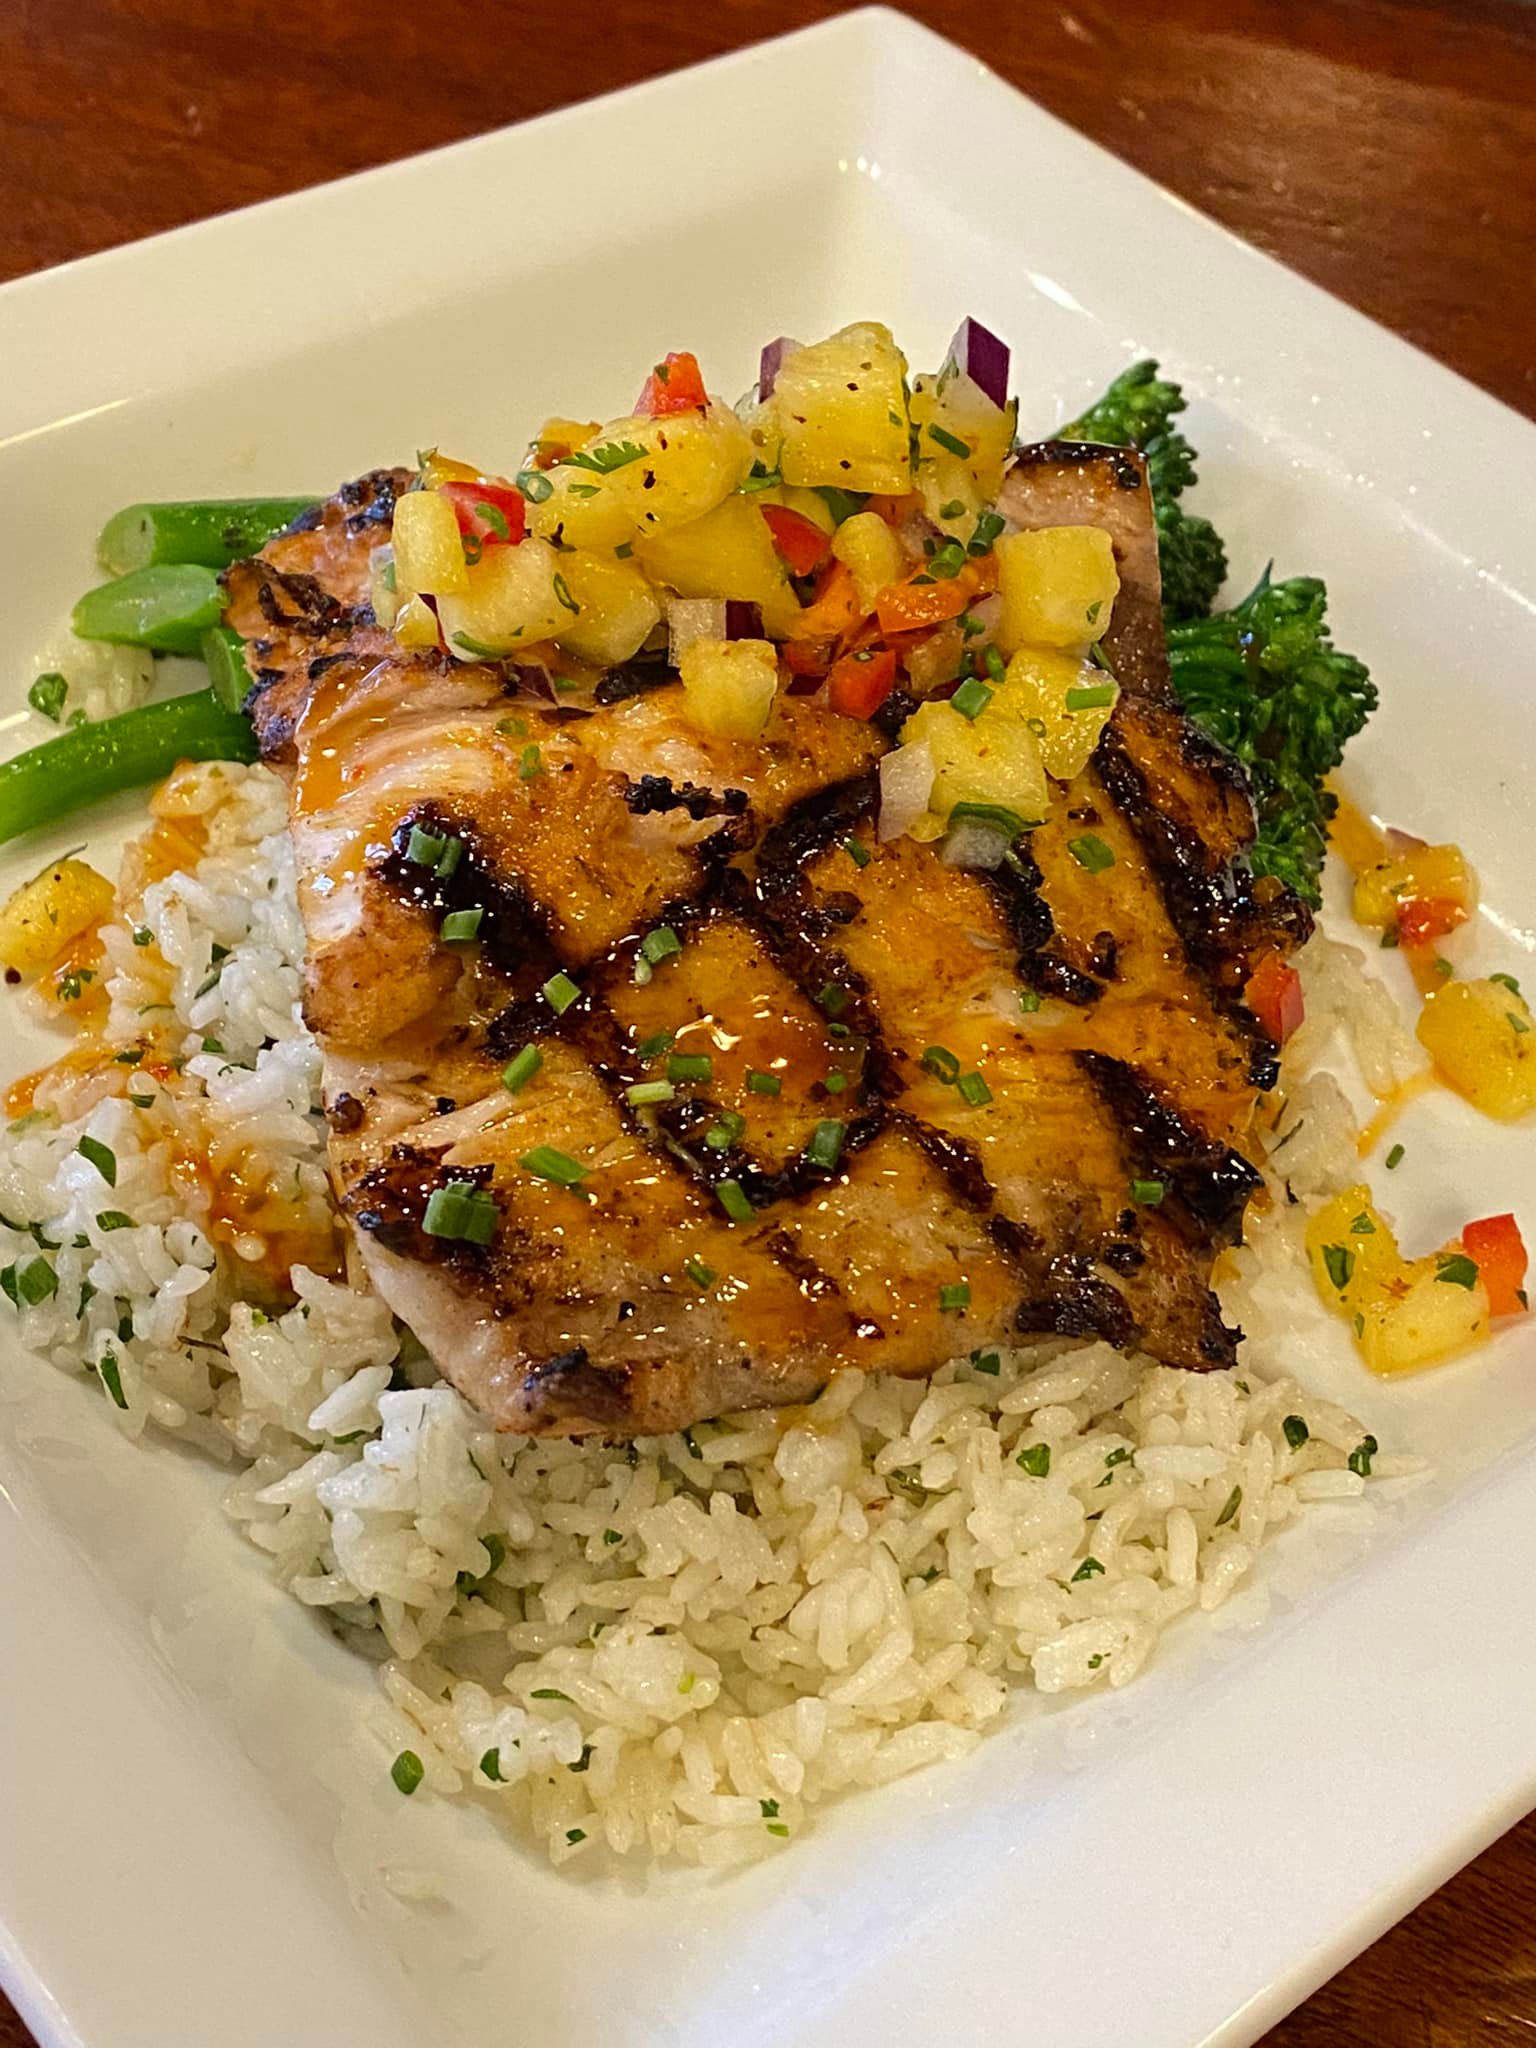 chicken served over rice and vegetables